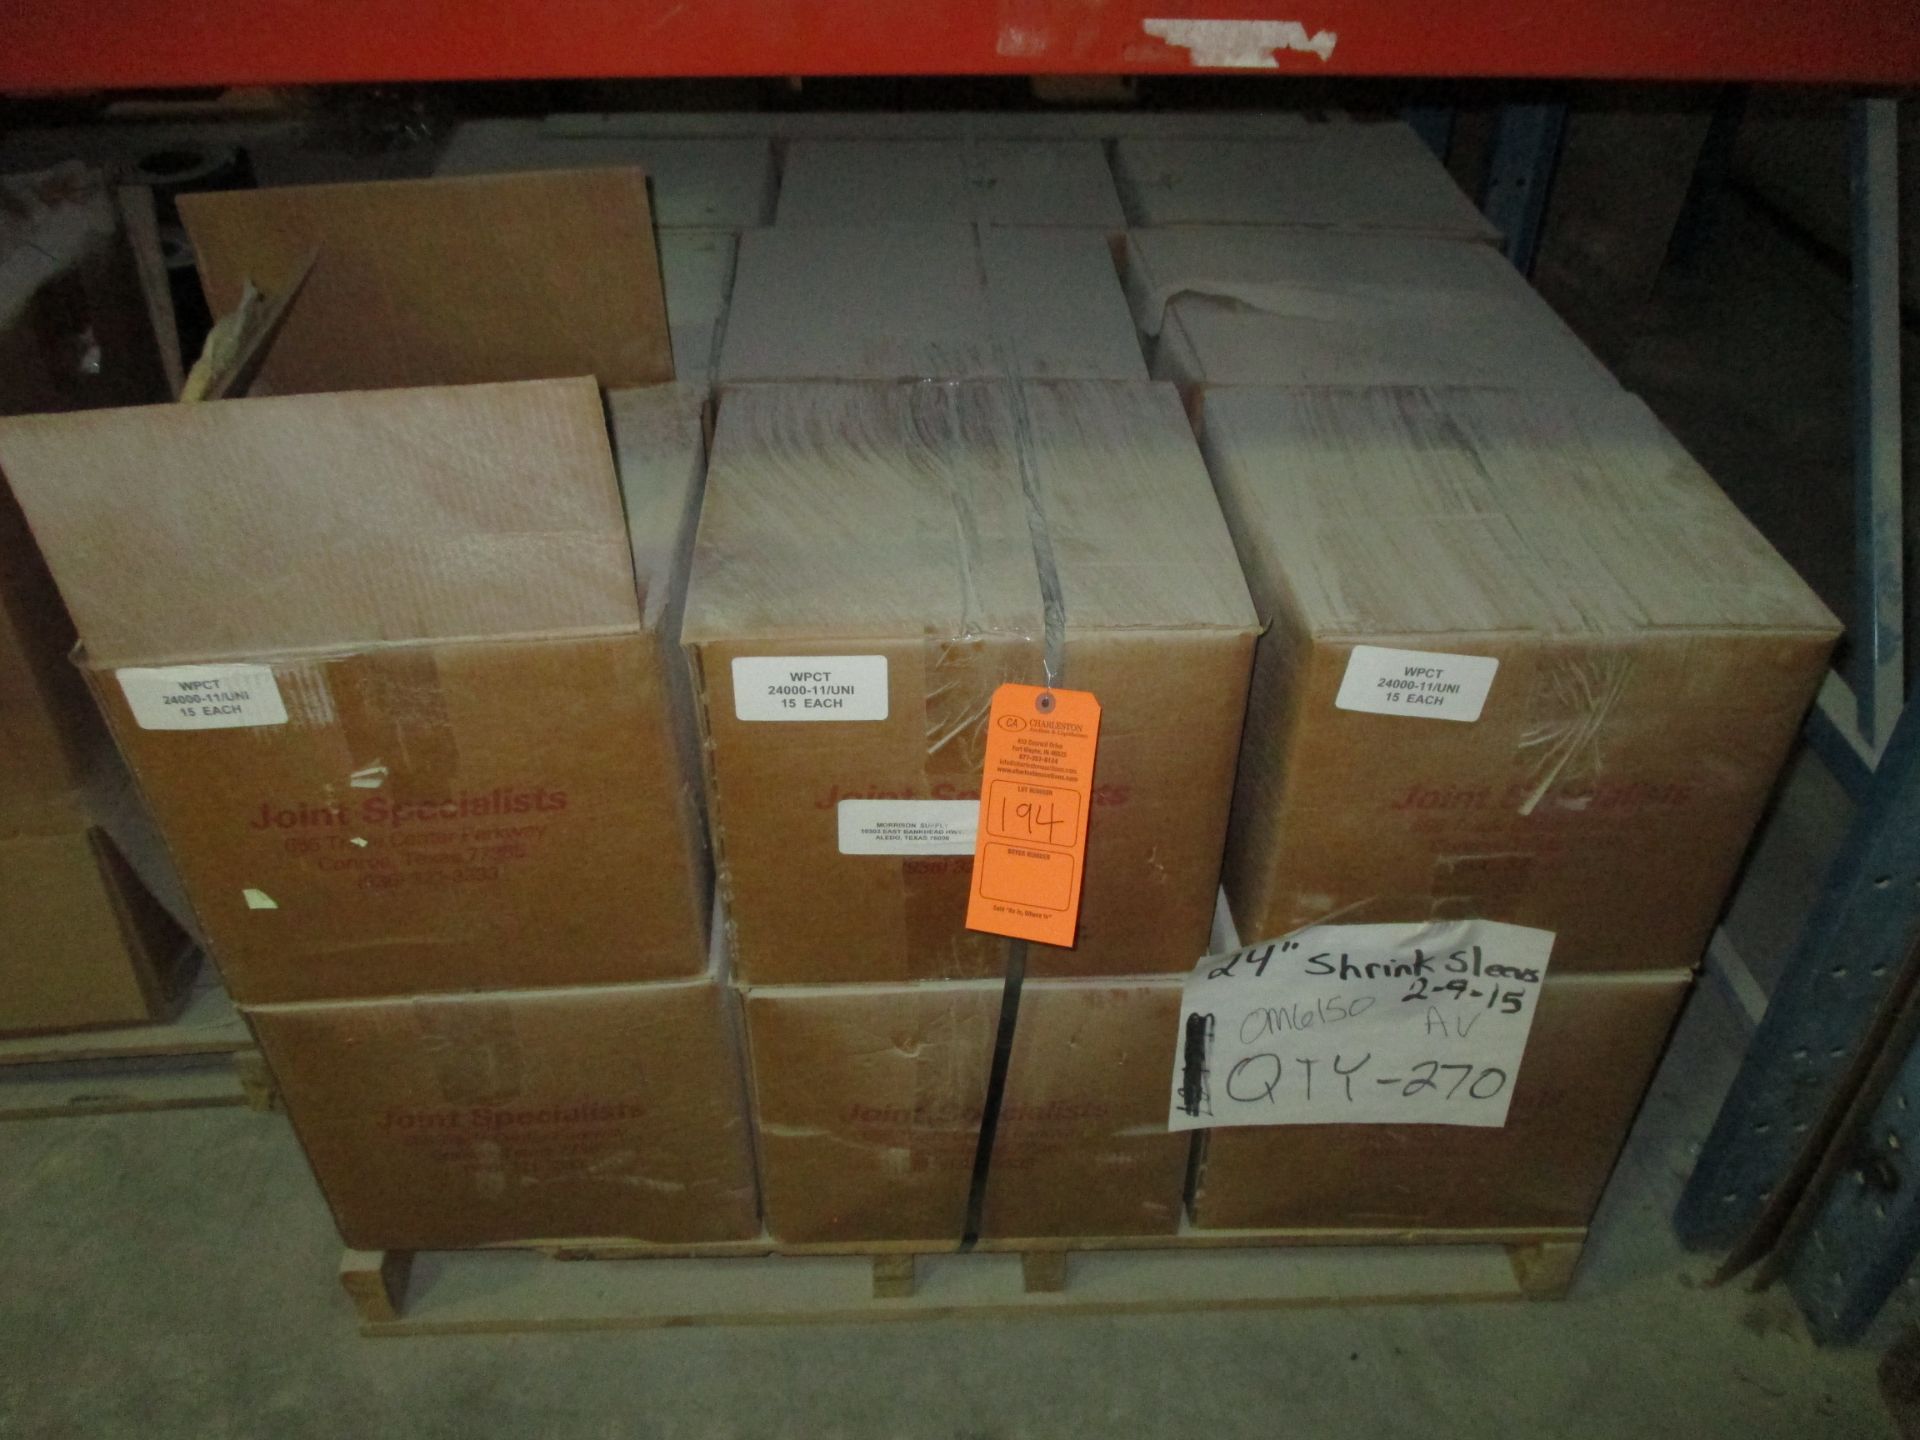 PALLET OF JOINT SPECIALIST 24" SHRINK SLEEVES(LOCATED AT 500 BEARCAT ROAD ALEDO, TX 76008)